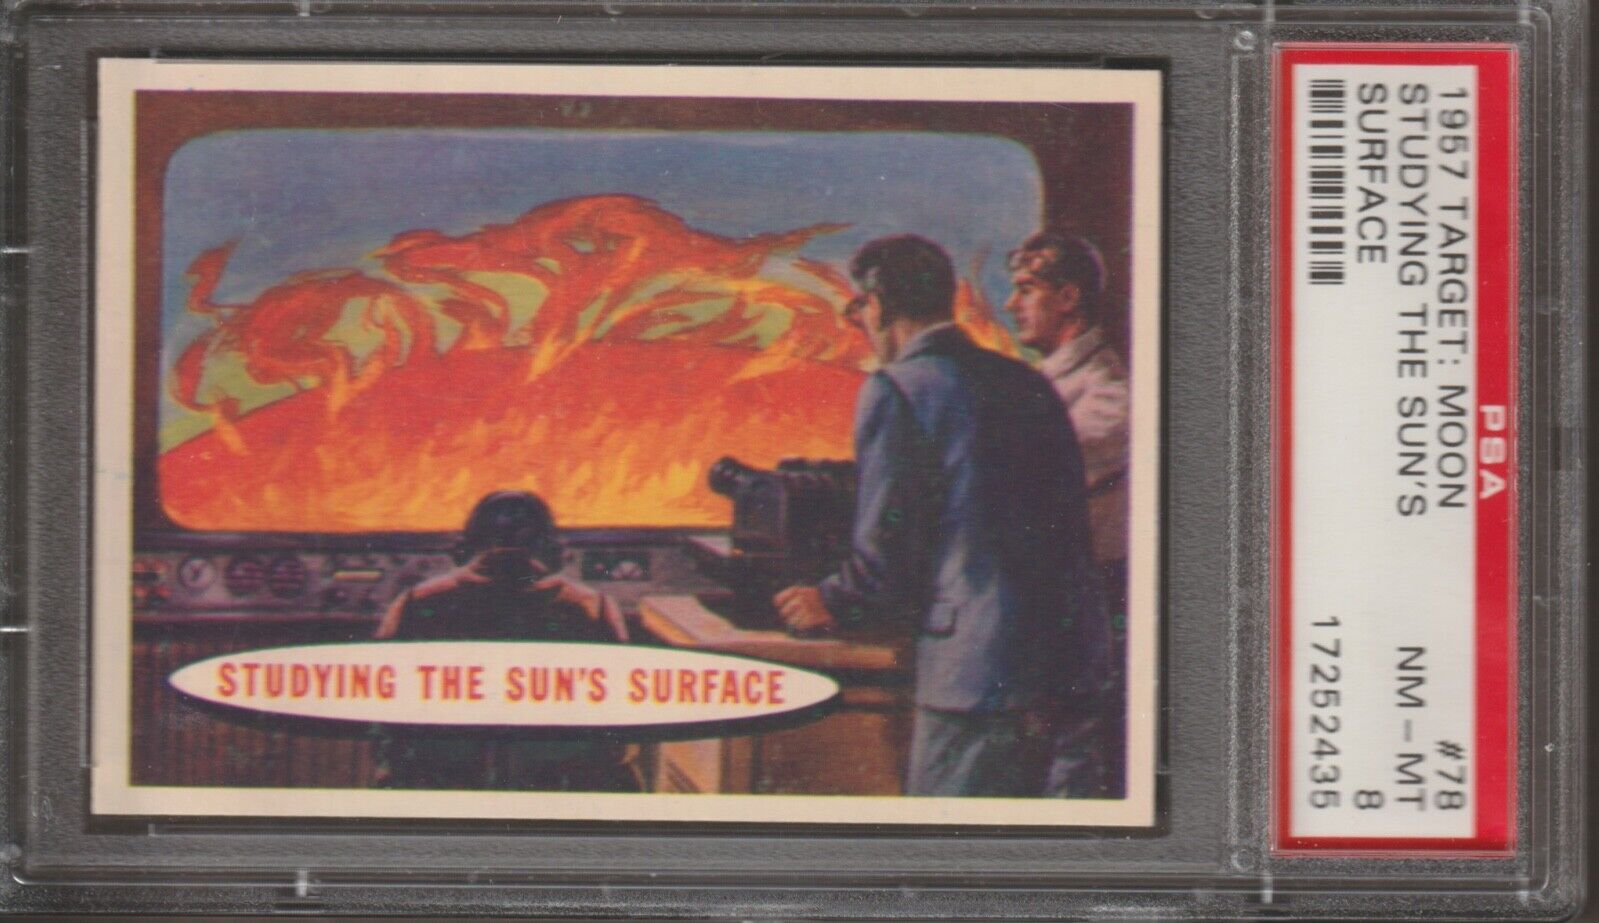 1957 TARGET: MOON TRADING CARD #78 - PSA 8 - STUDYING THE SUN\'S SURFACE- SPACE